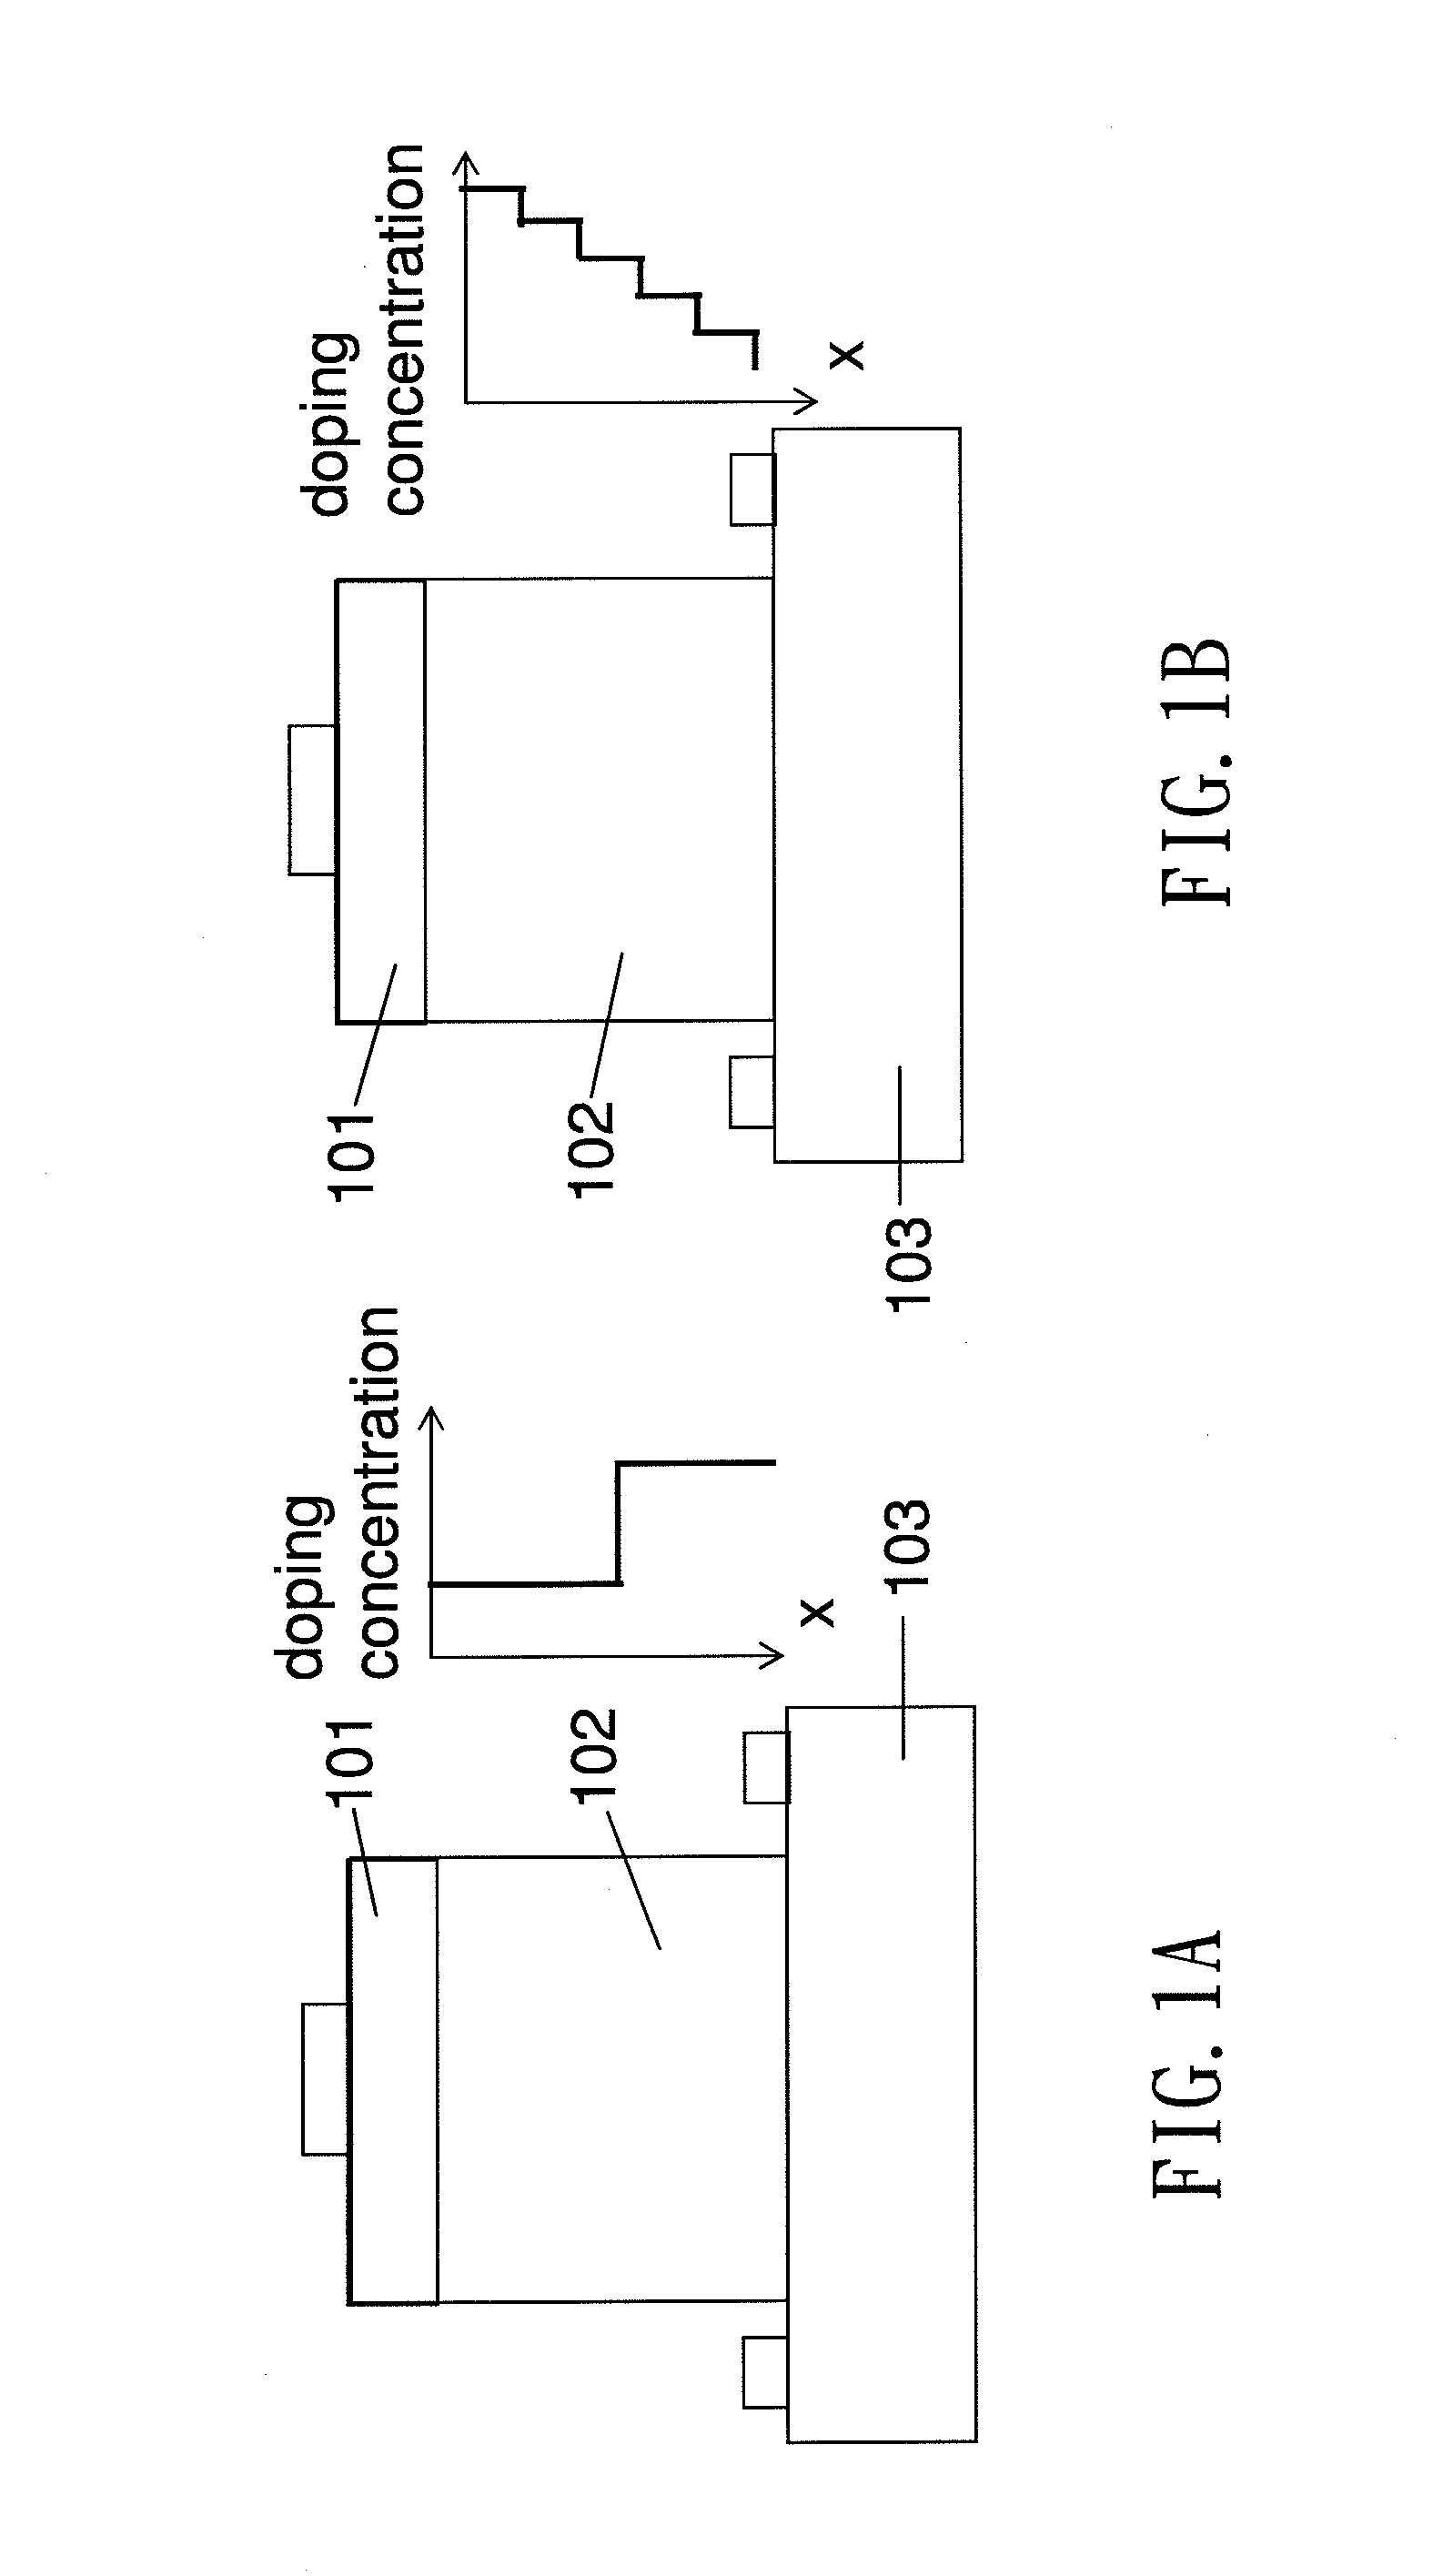 Integrated structure of compound semiconductor devices